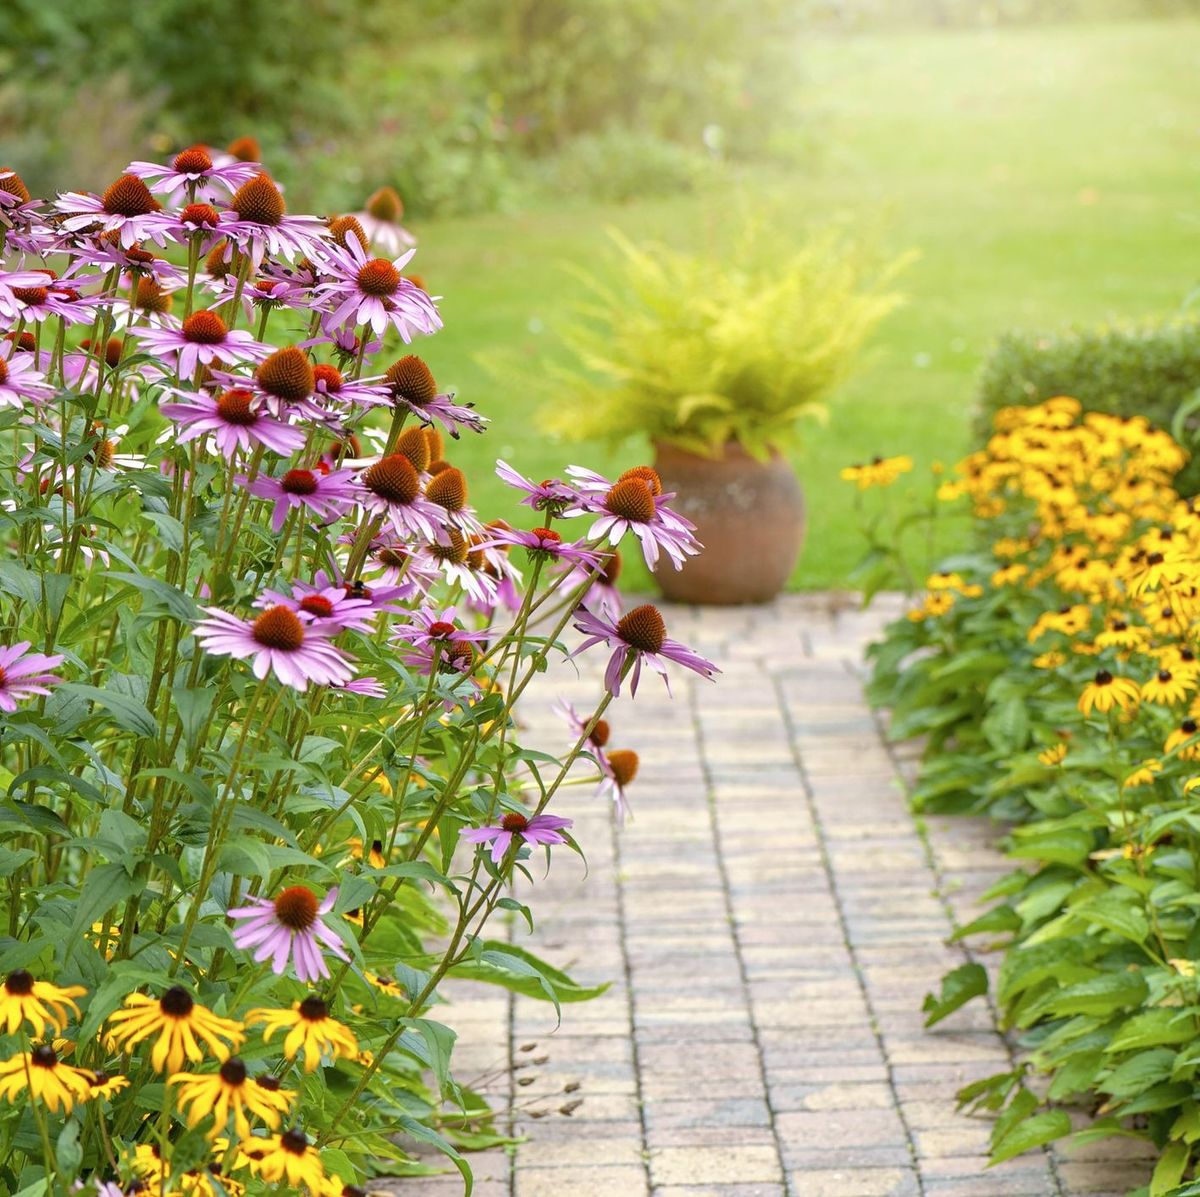 Perennials made simple - how to choose and grow the best plants for your  borders - The Middle-Sized Garden